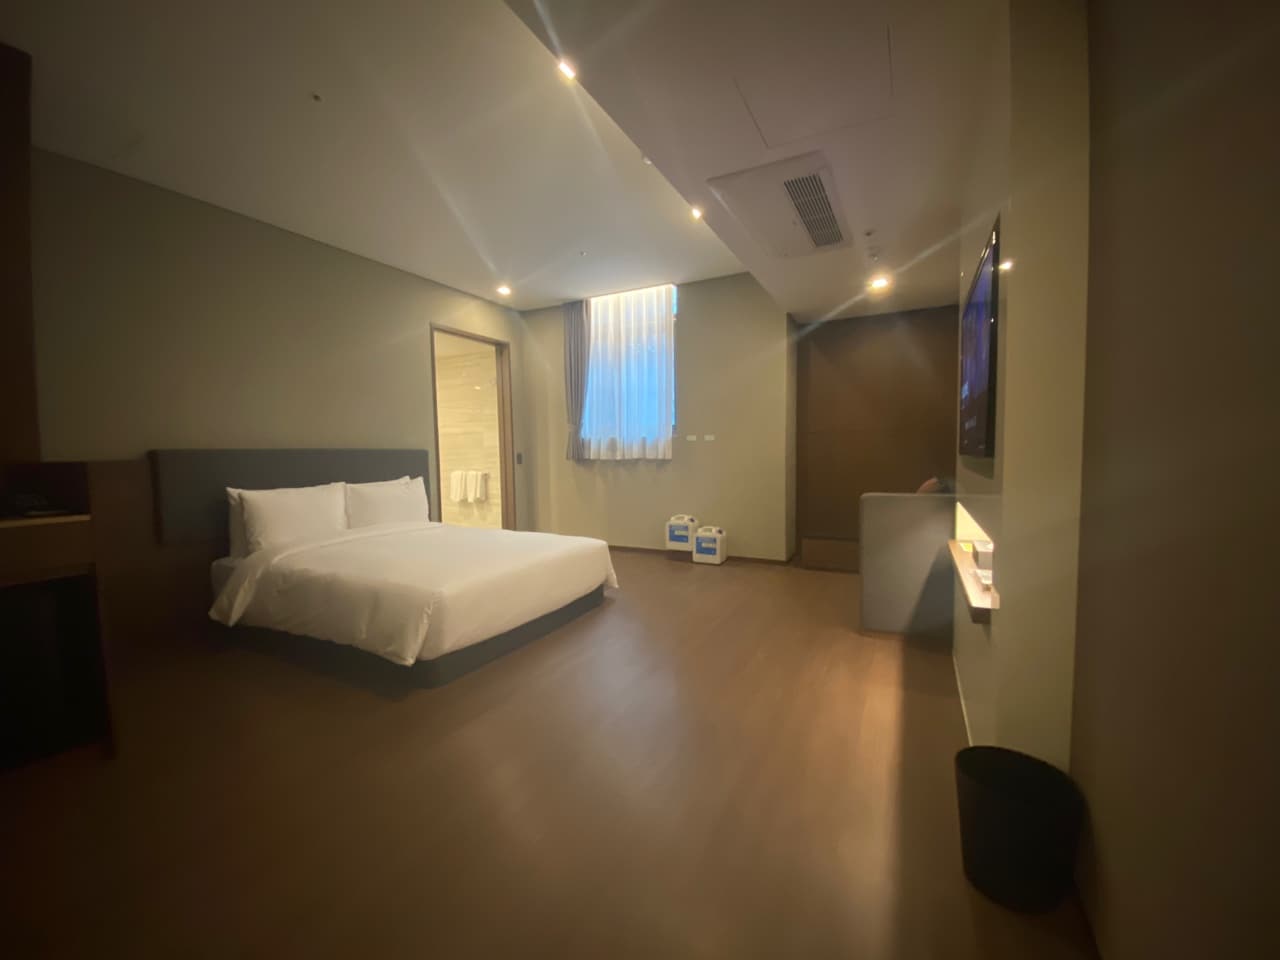 Accessible guestroom0 : Spacious hotel room decorated in oak color